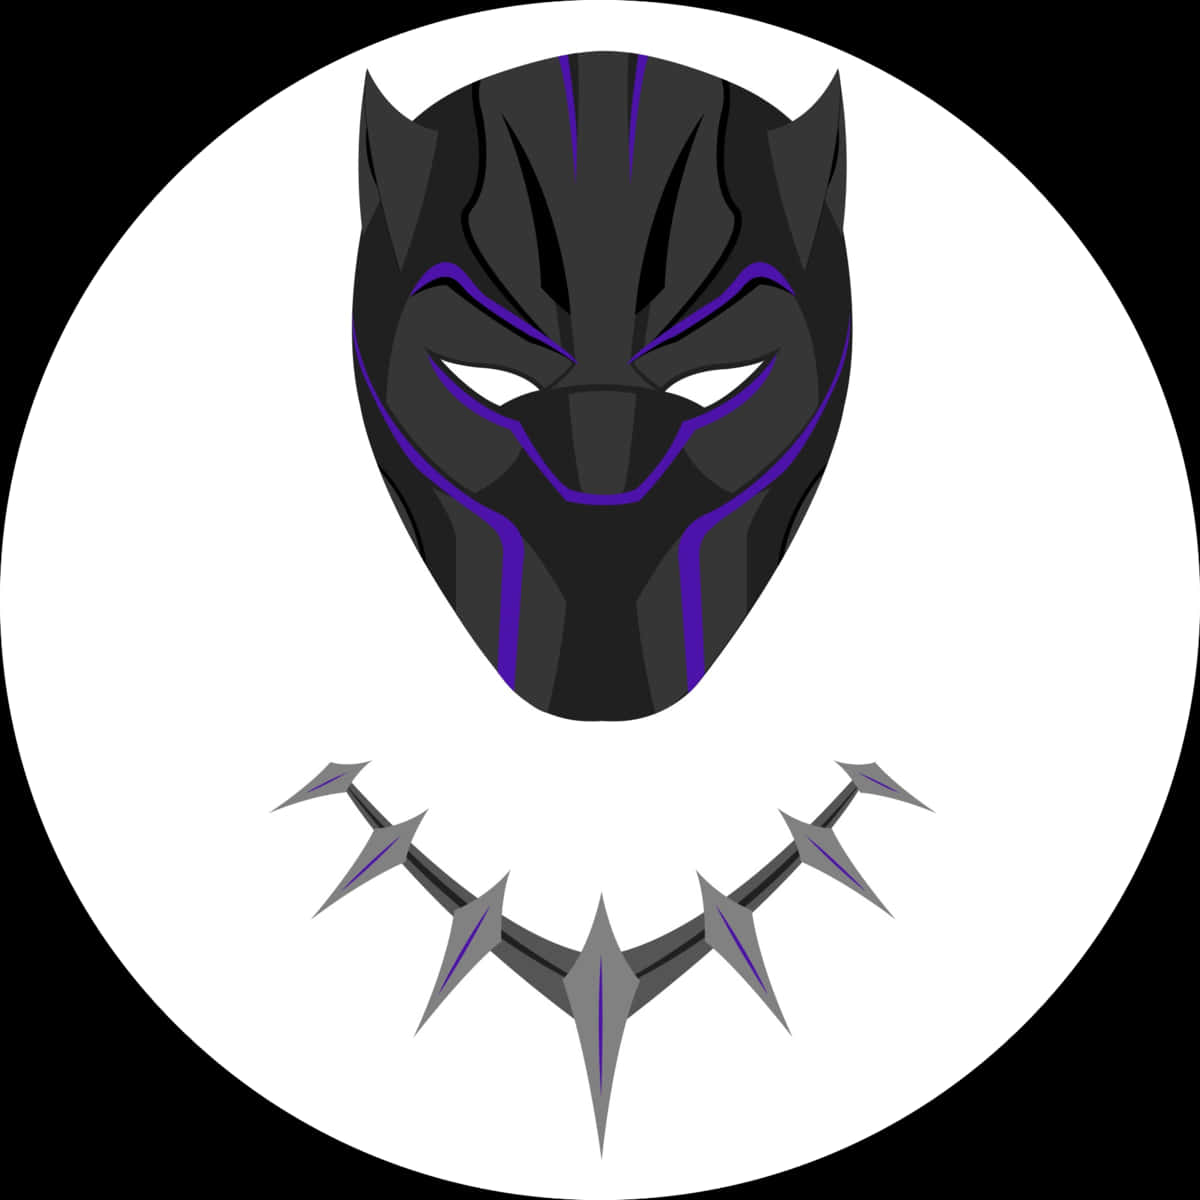 A Black Panther Mask With Blue Stripes